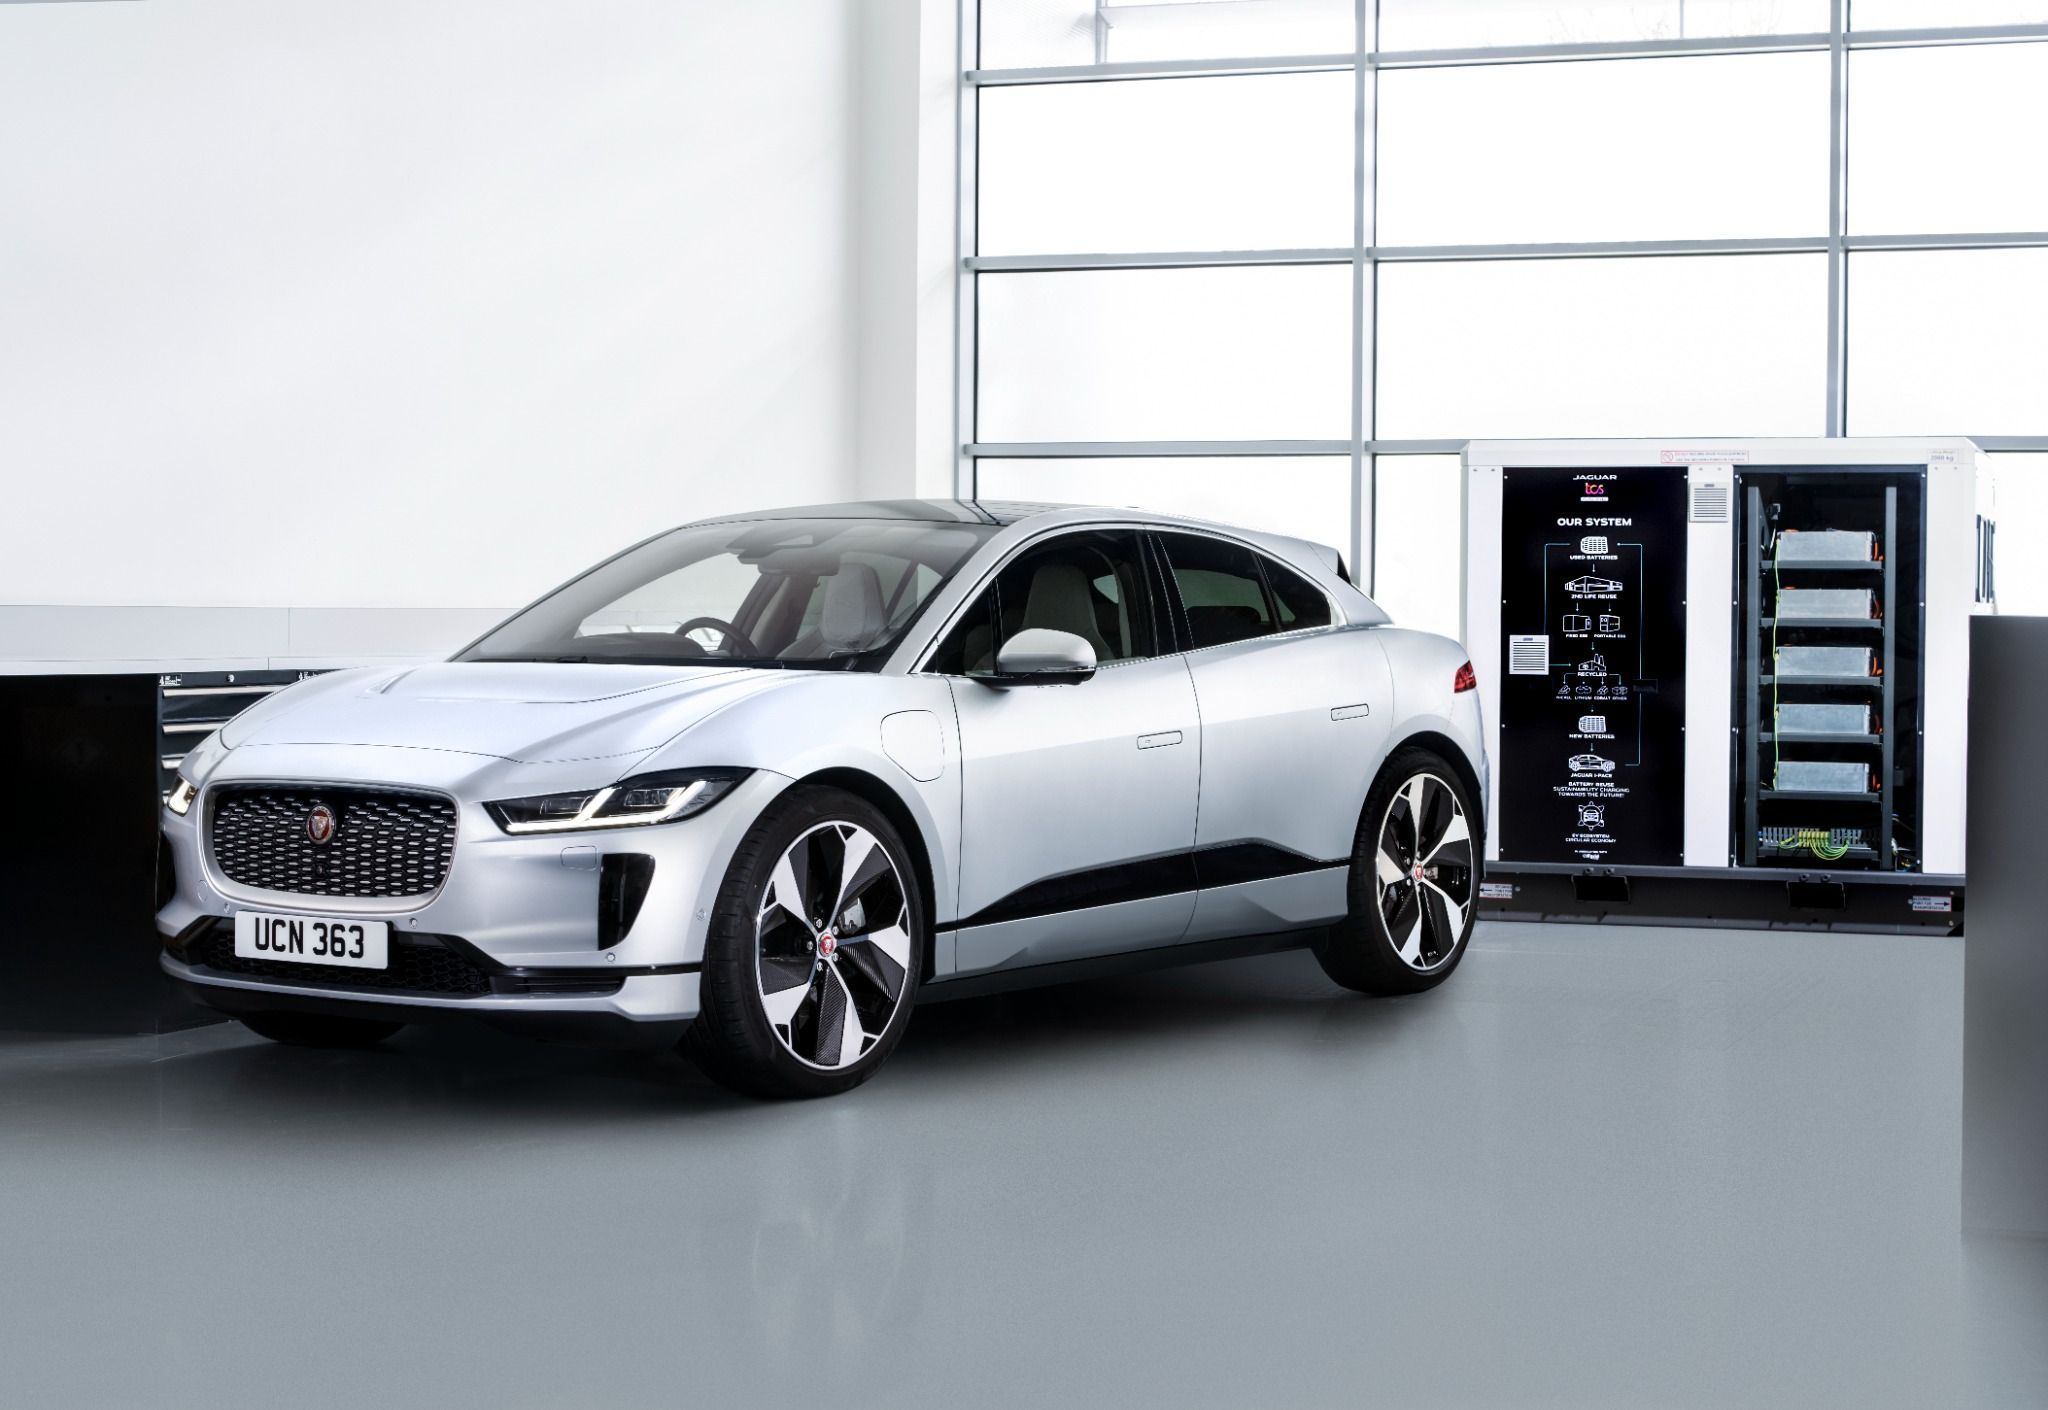 White Jaguar I-pace in a showroom